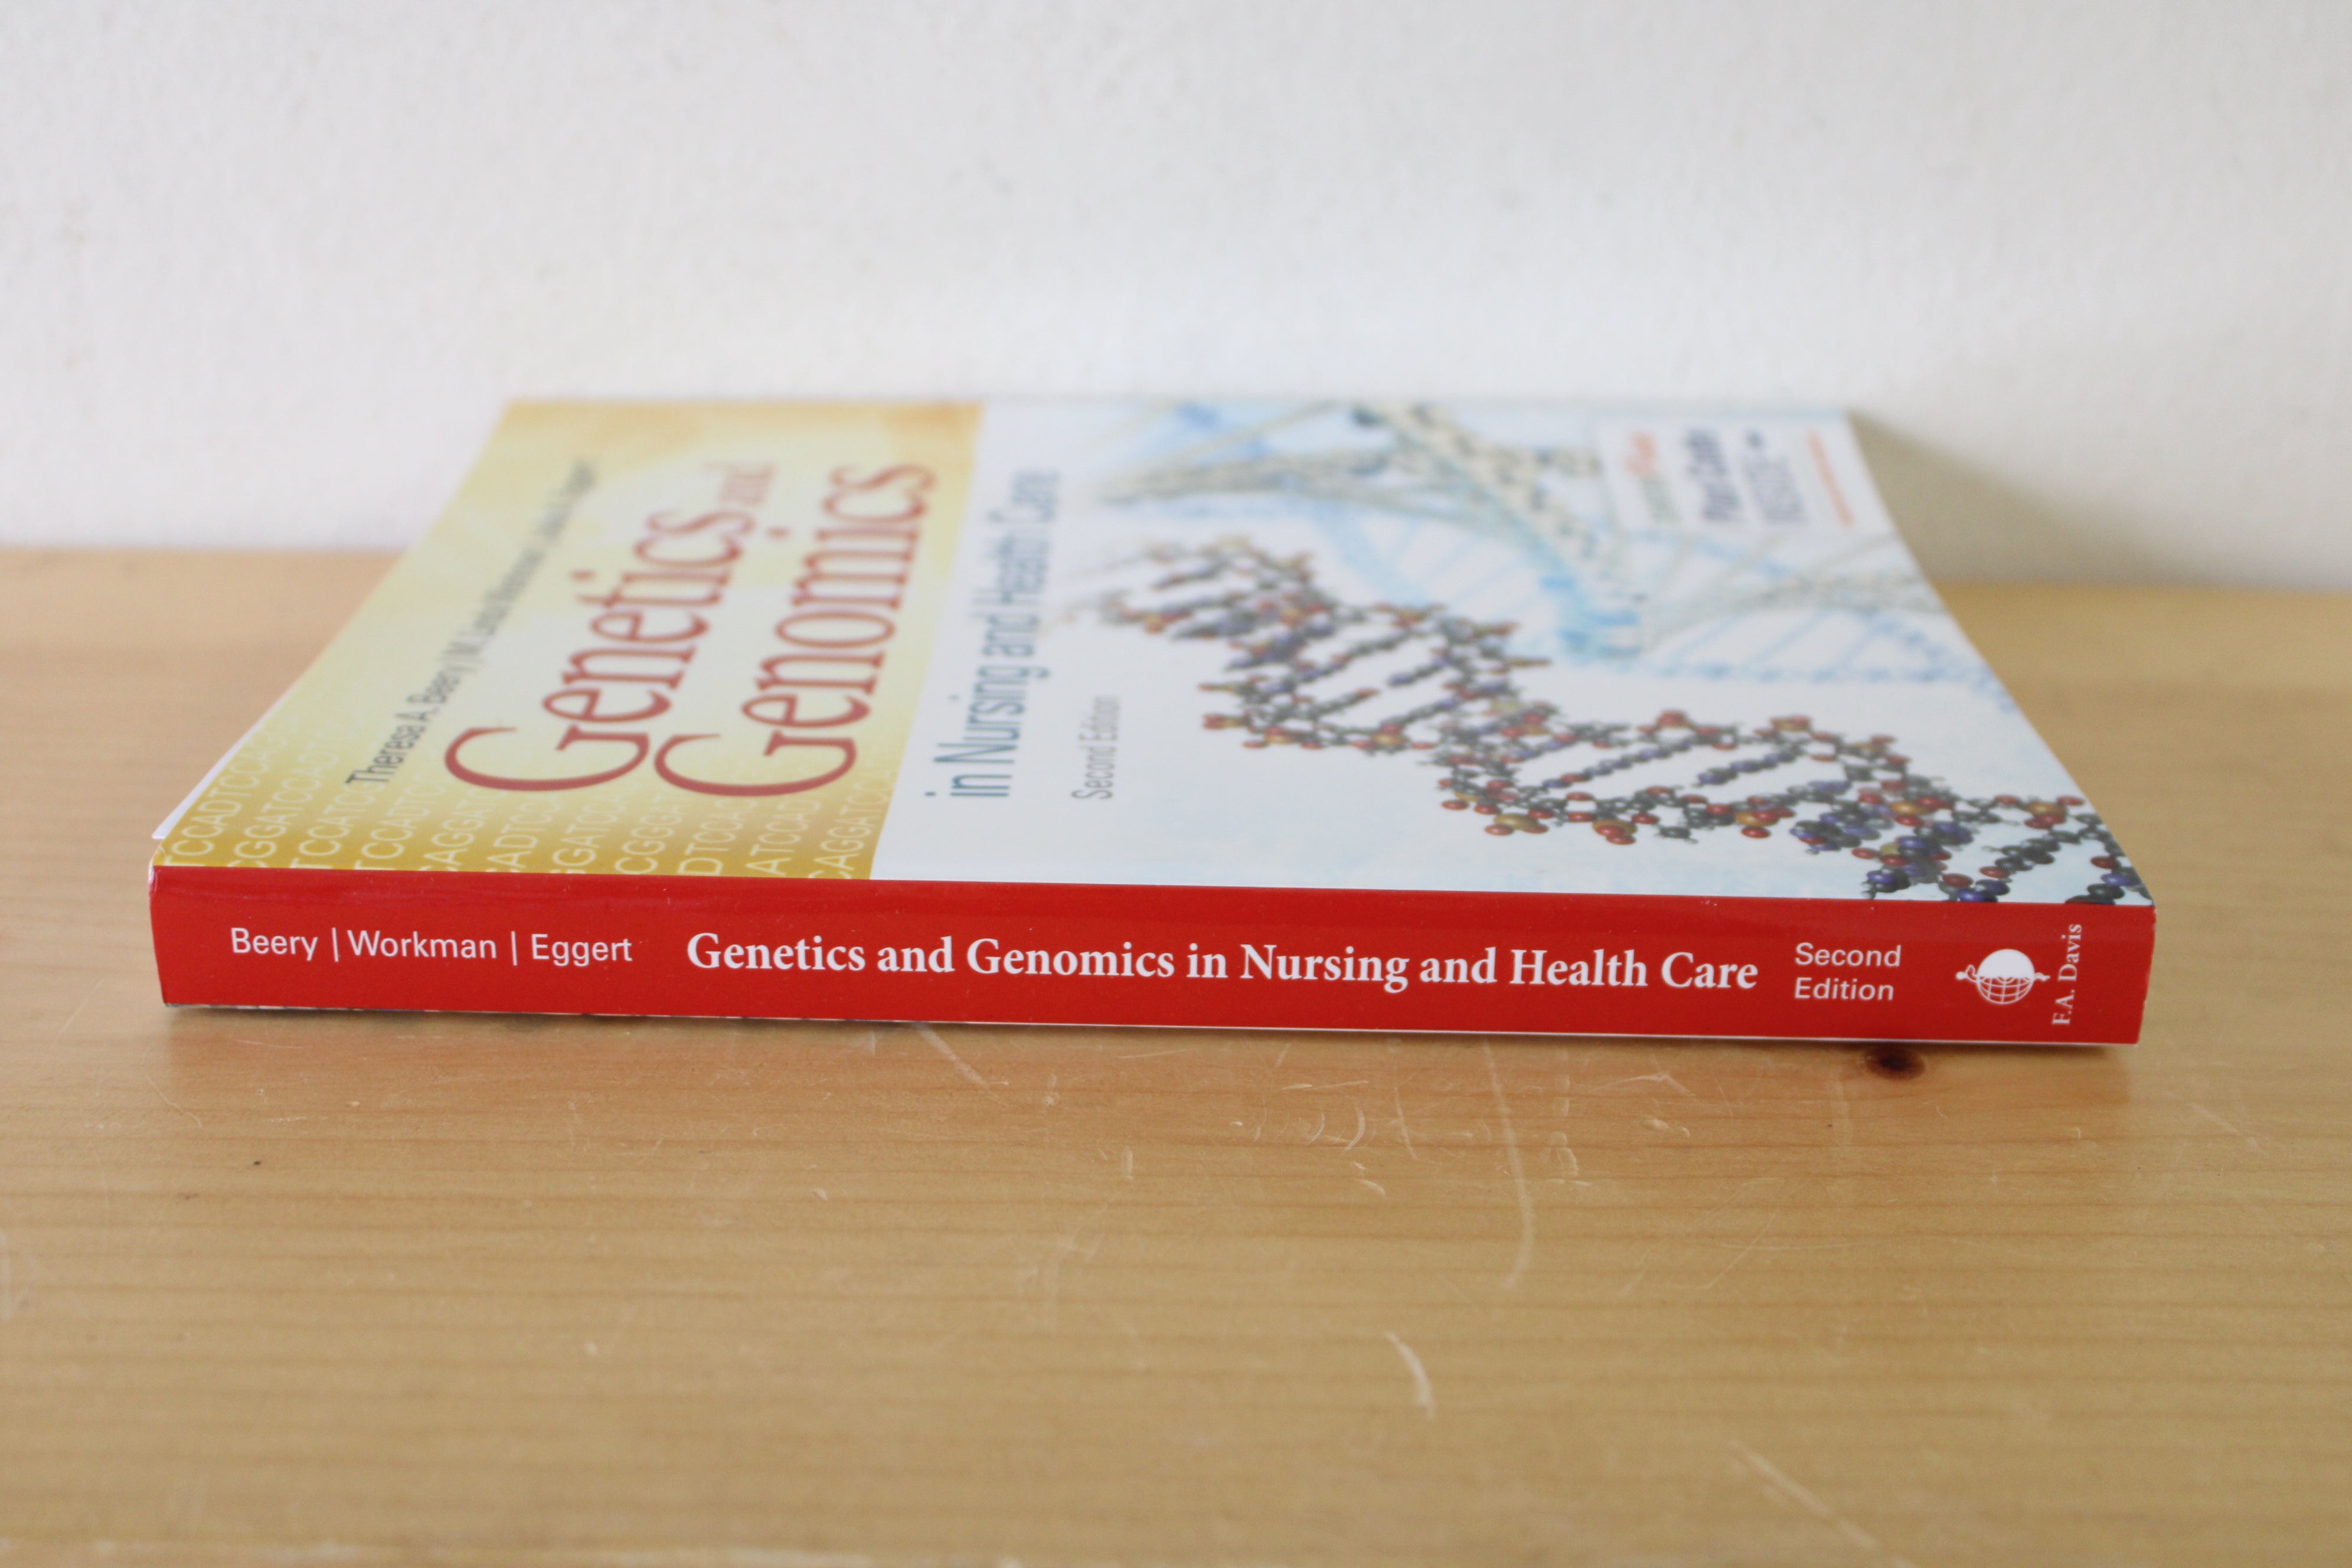 Genetics and Genomics in Nursing and Health Care By Beery, Workman, and Eggert